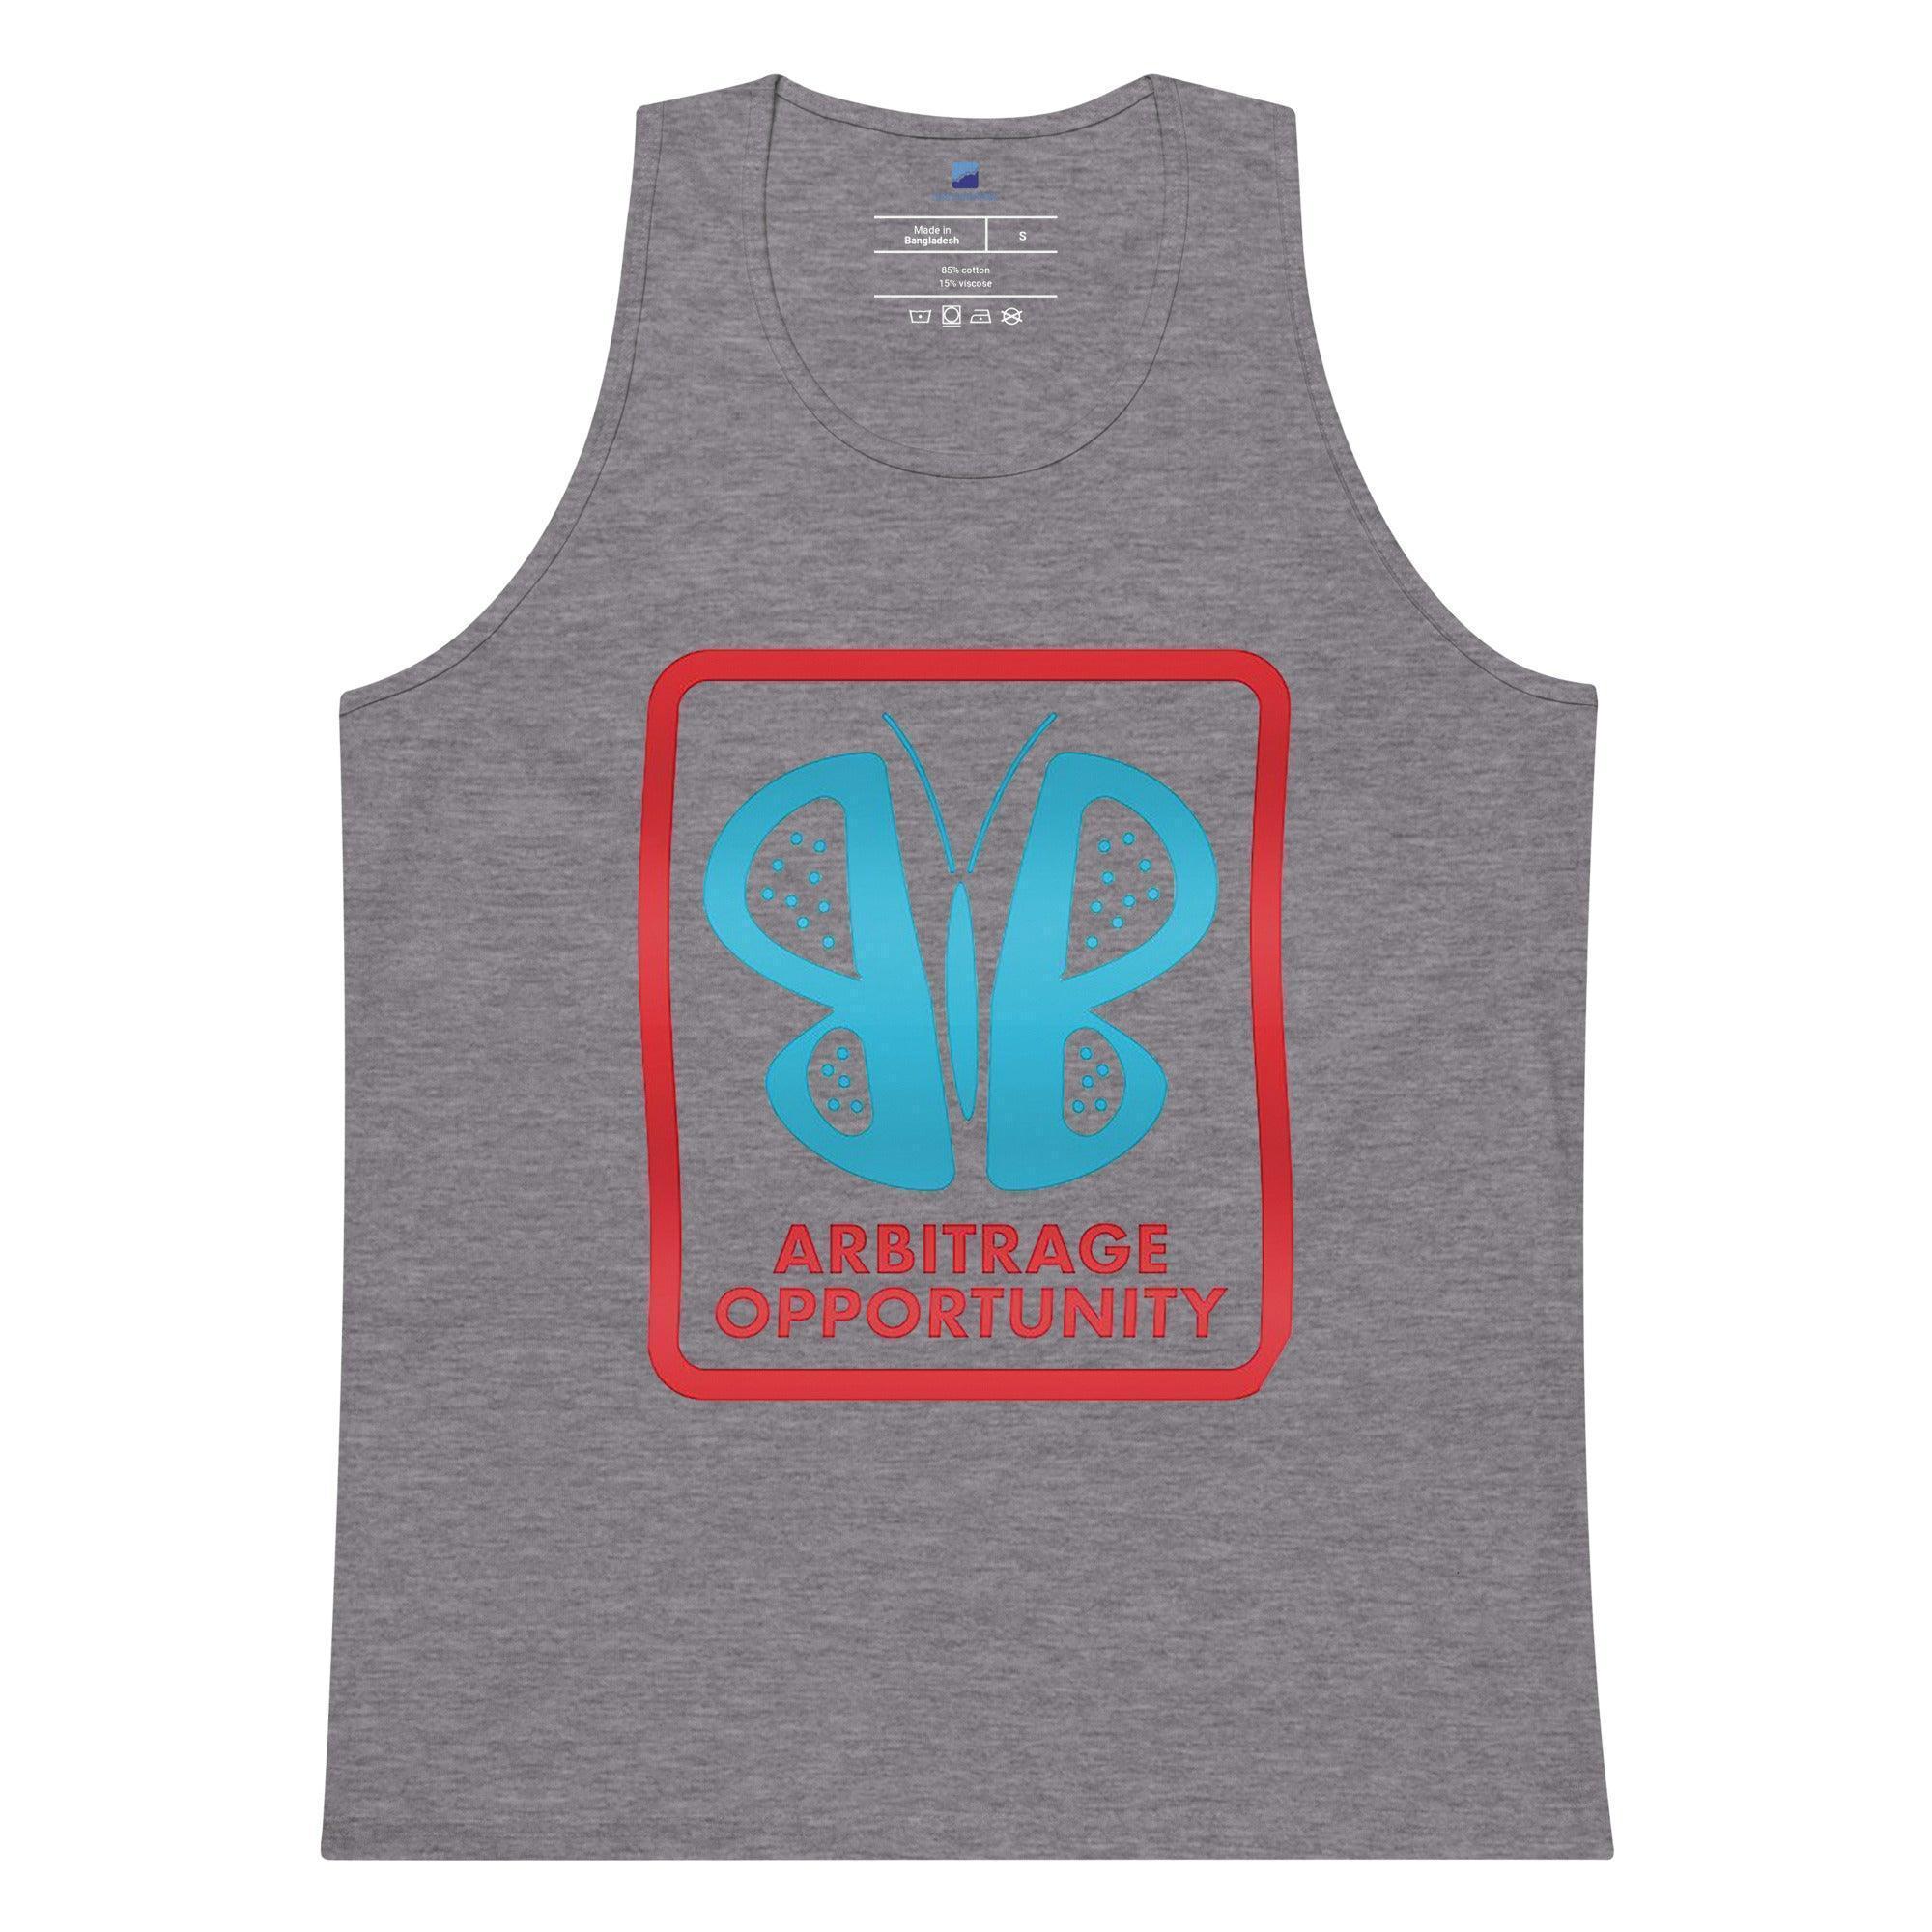 Arbitrage Opportunity Tank Top - InvestmenTees